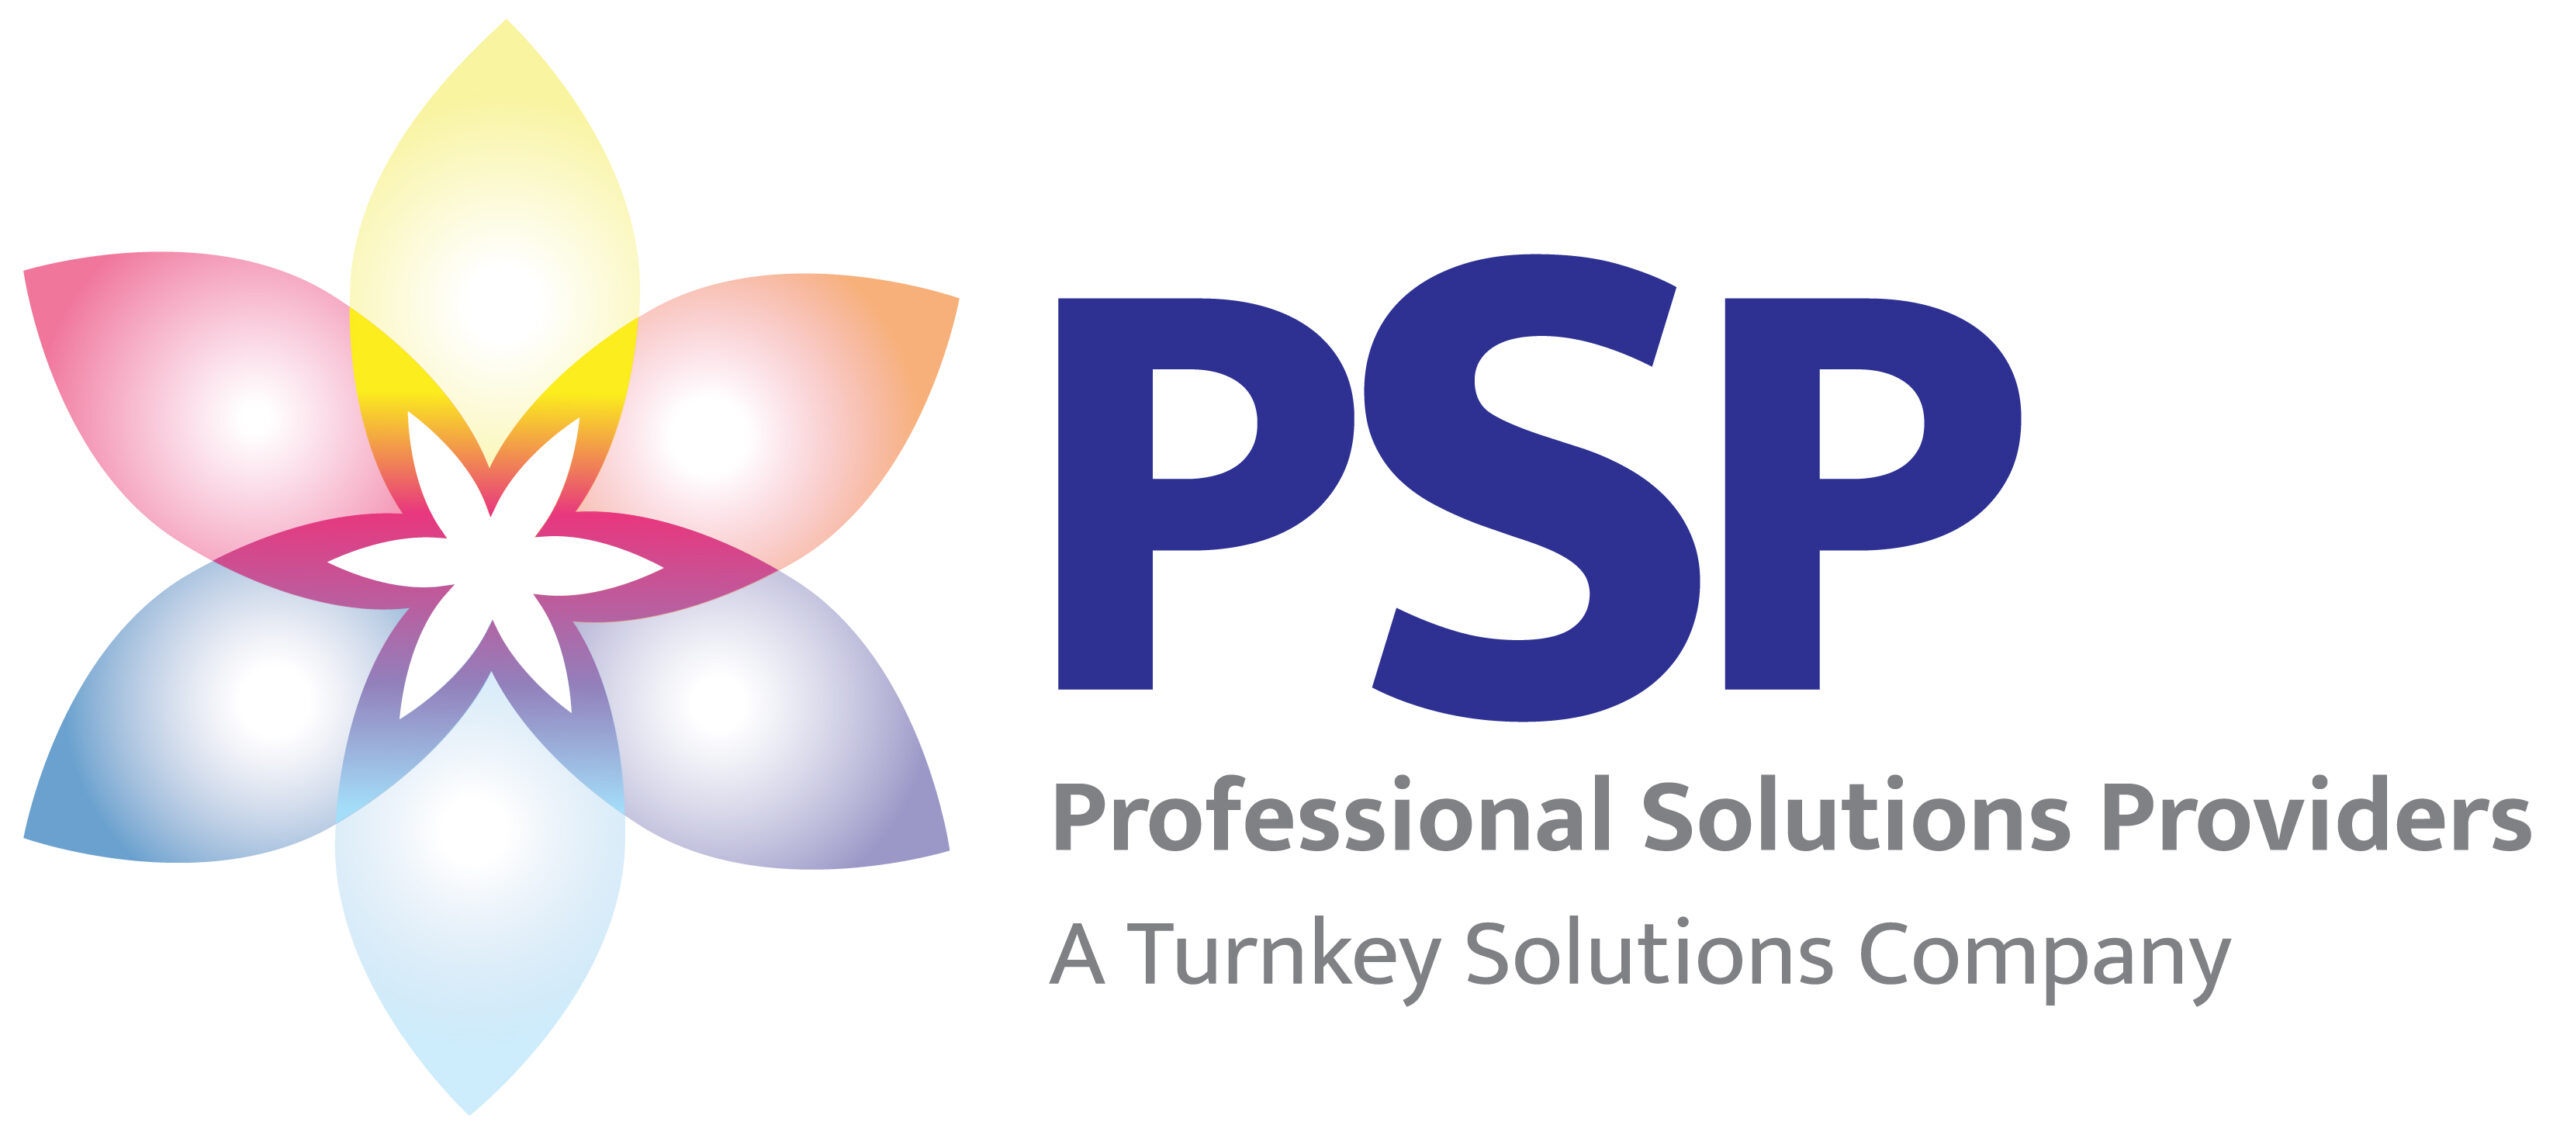 PSP Turnkey Solutions partners